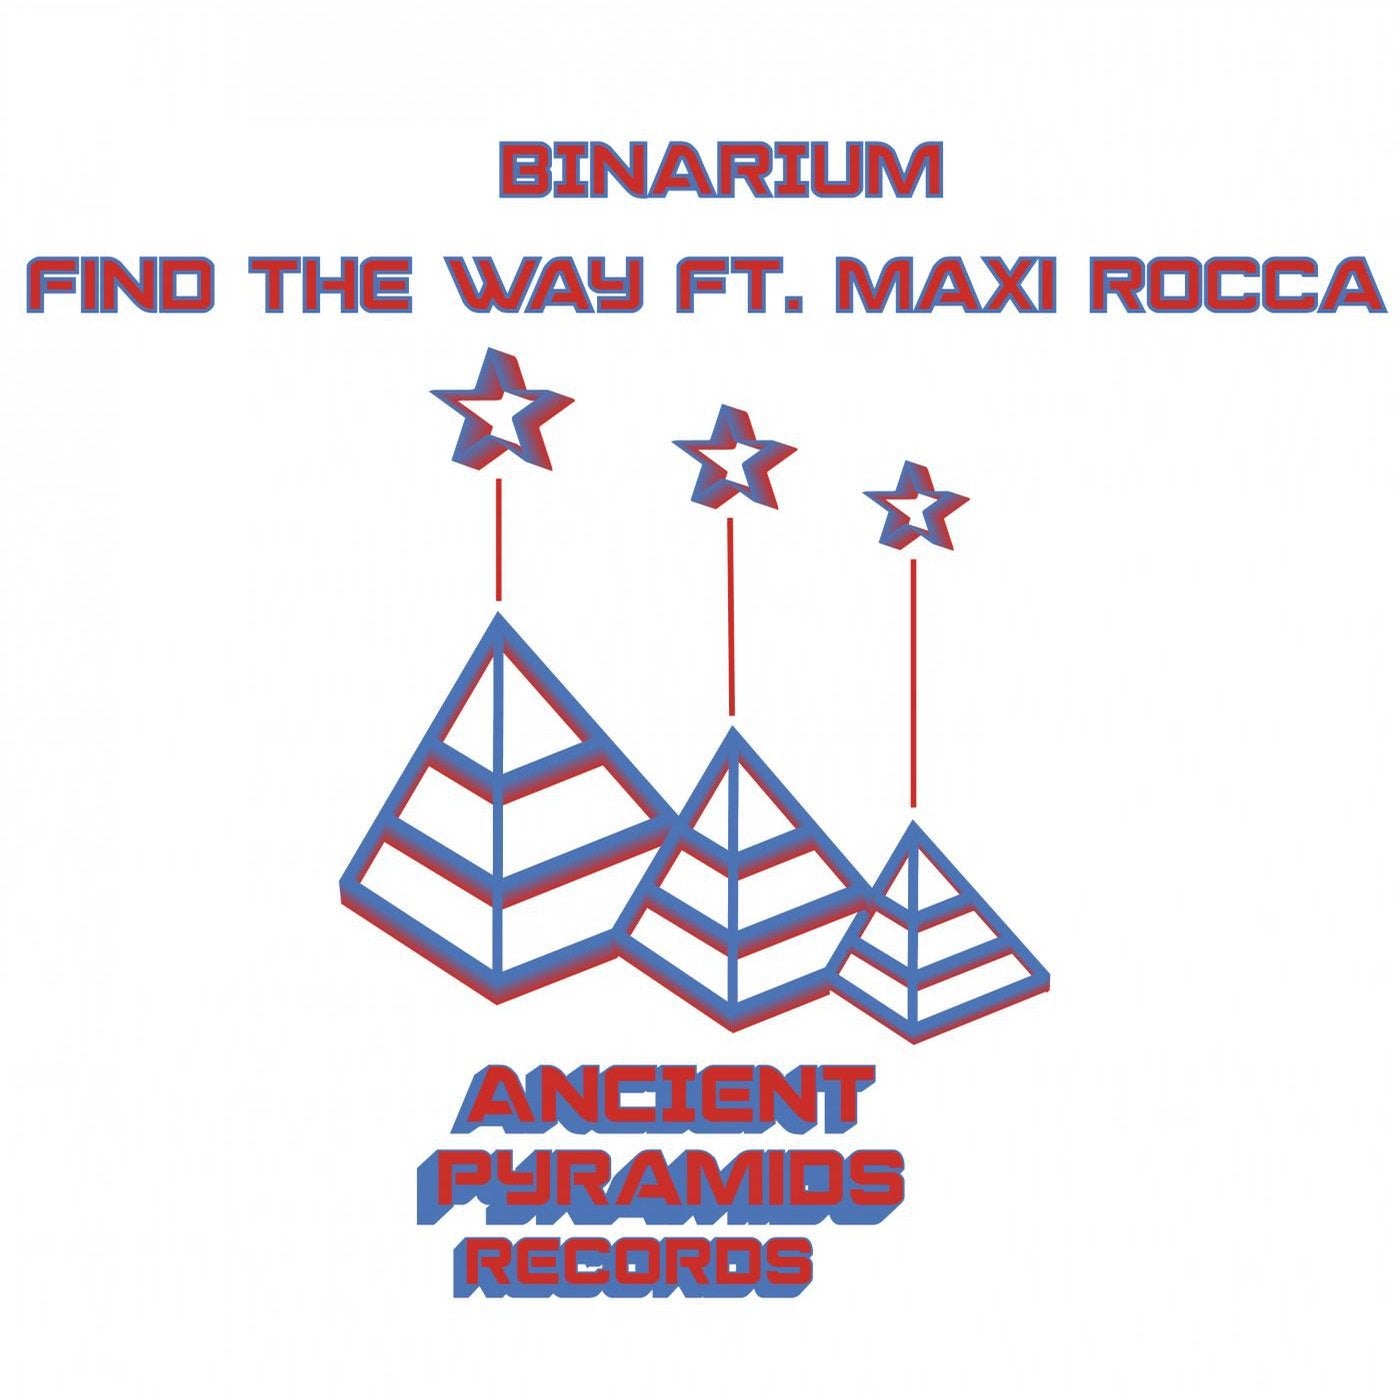 Find a Way Ft. Maxi Rocca